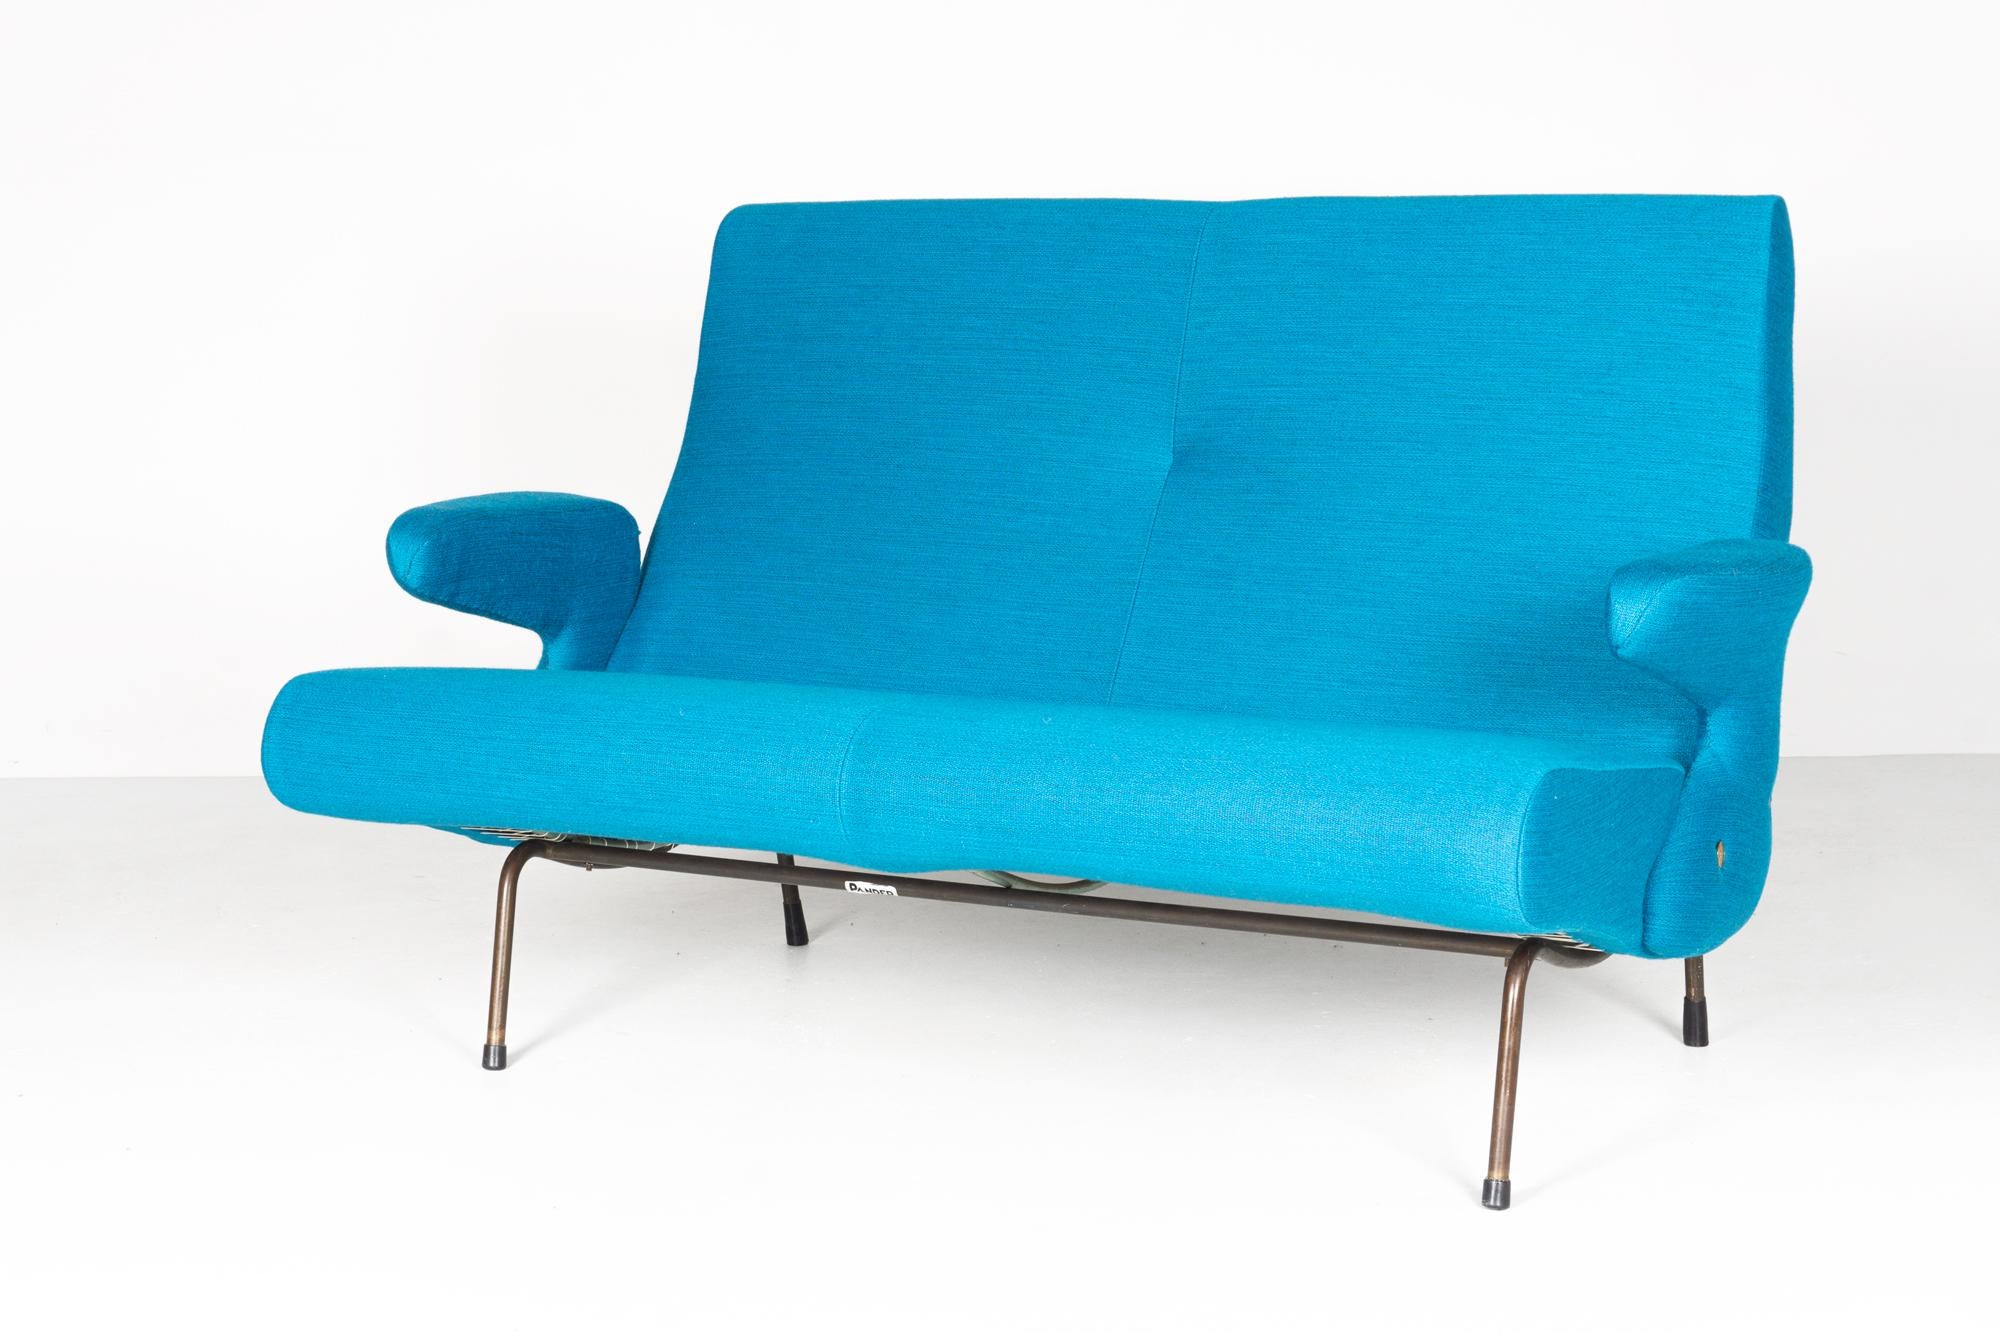 Sofa two-seat, model 'Delfino' by Erberto Carboni, Arflex, 1954.
Complete new upholstery true to the 1954's orginal. High quality woolen Danish fabric.

